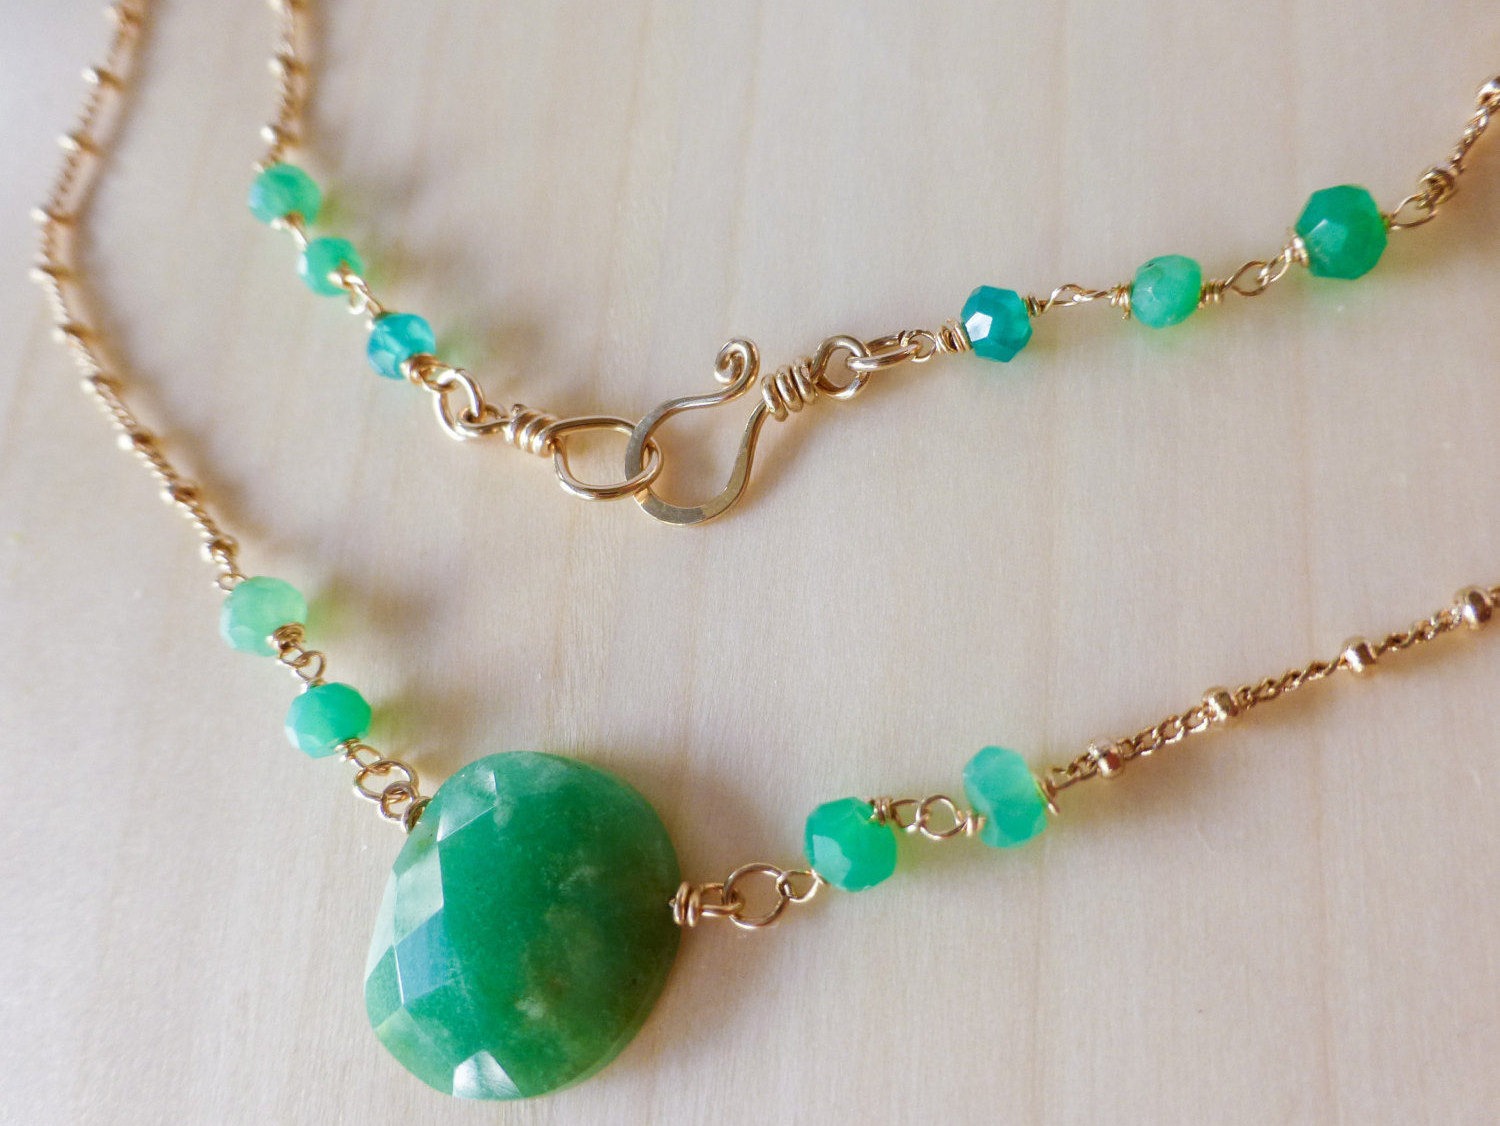 Green Chrysoprase Original Necklace in Gold Filled